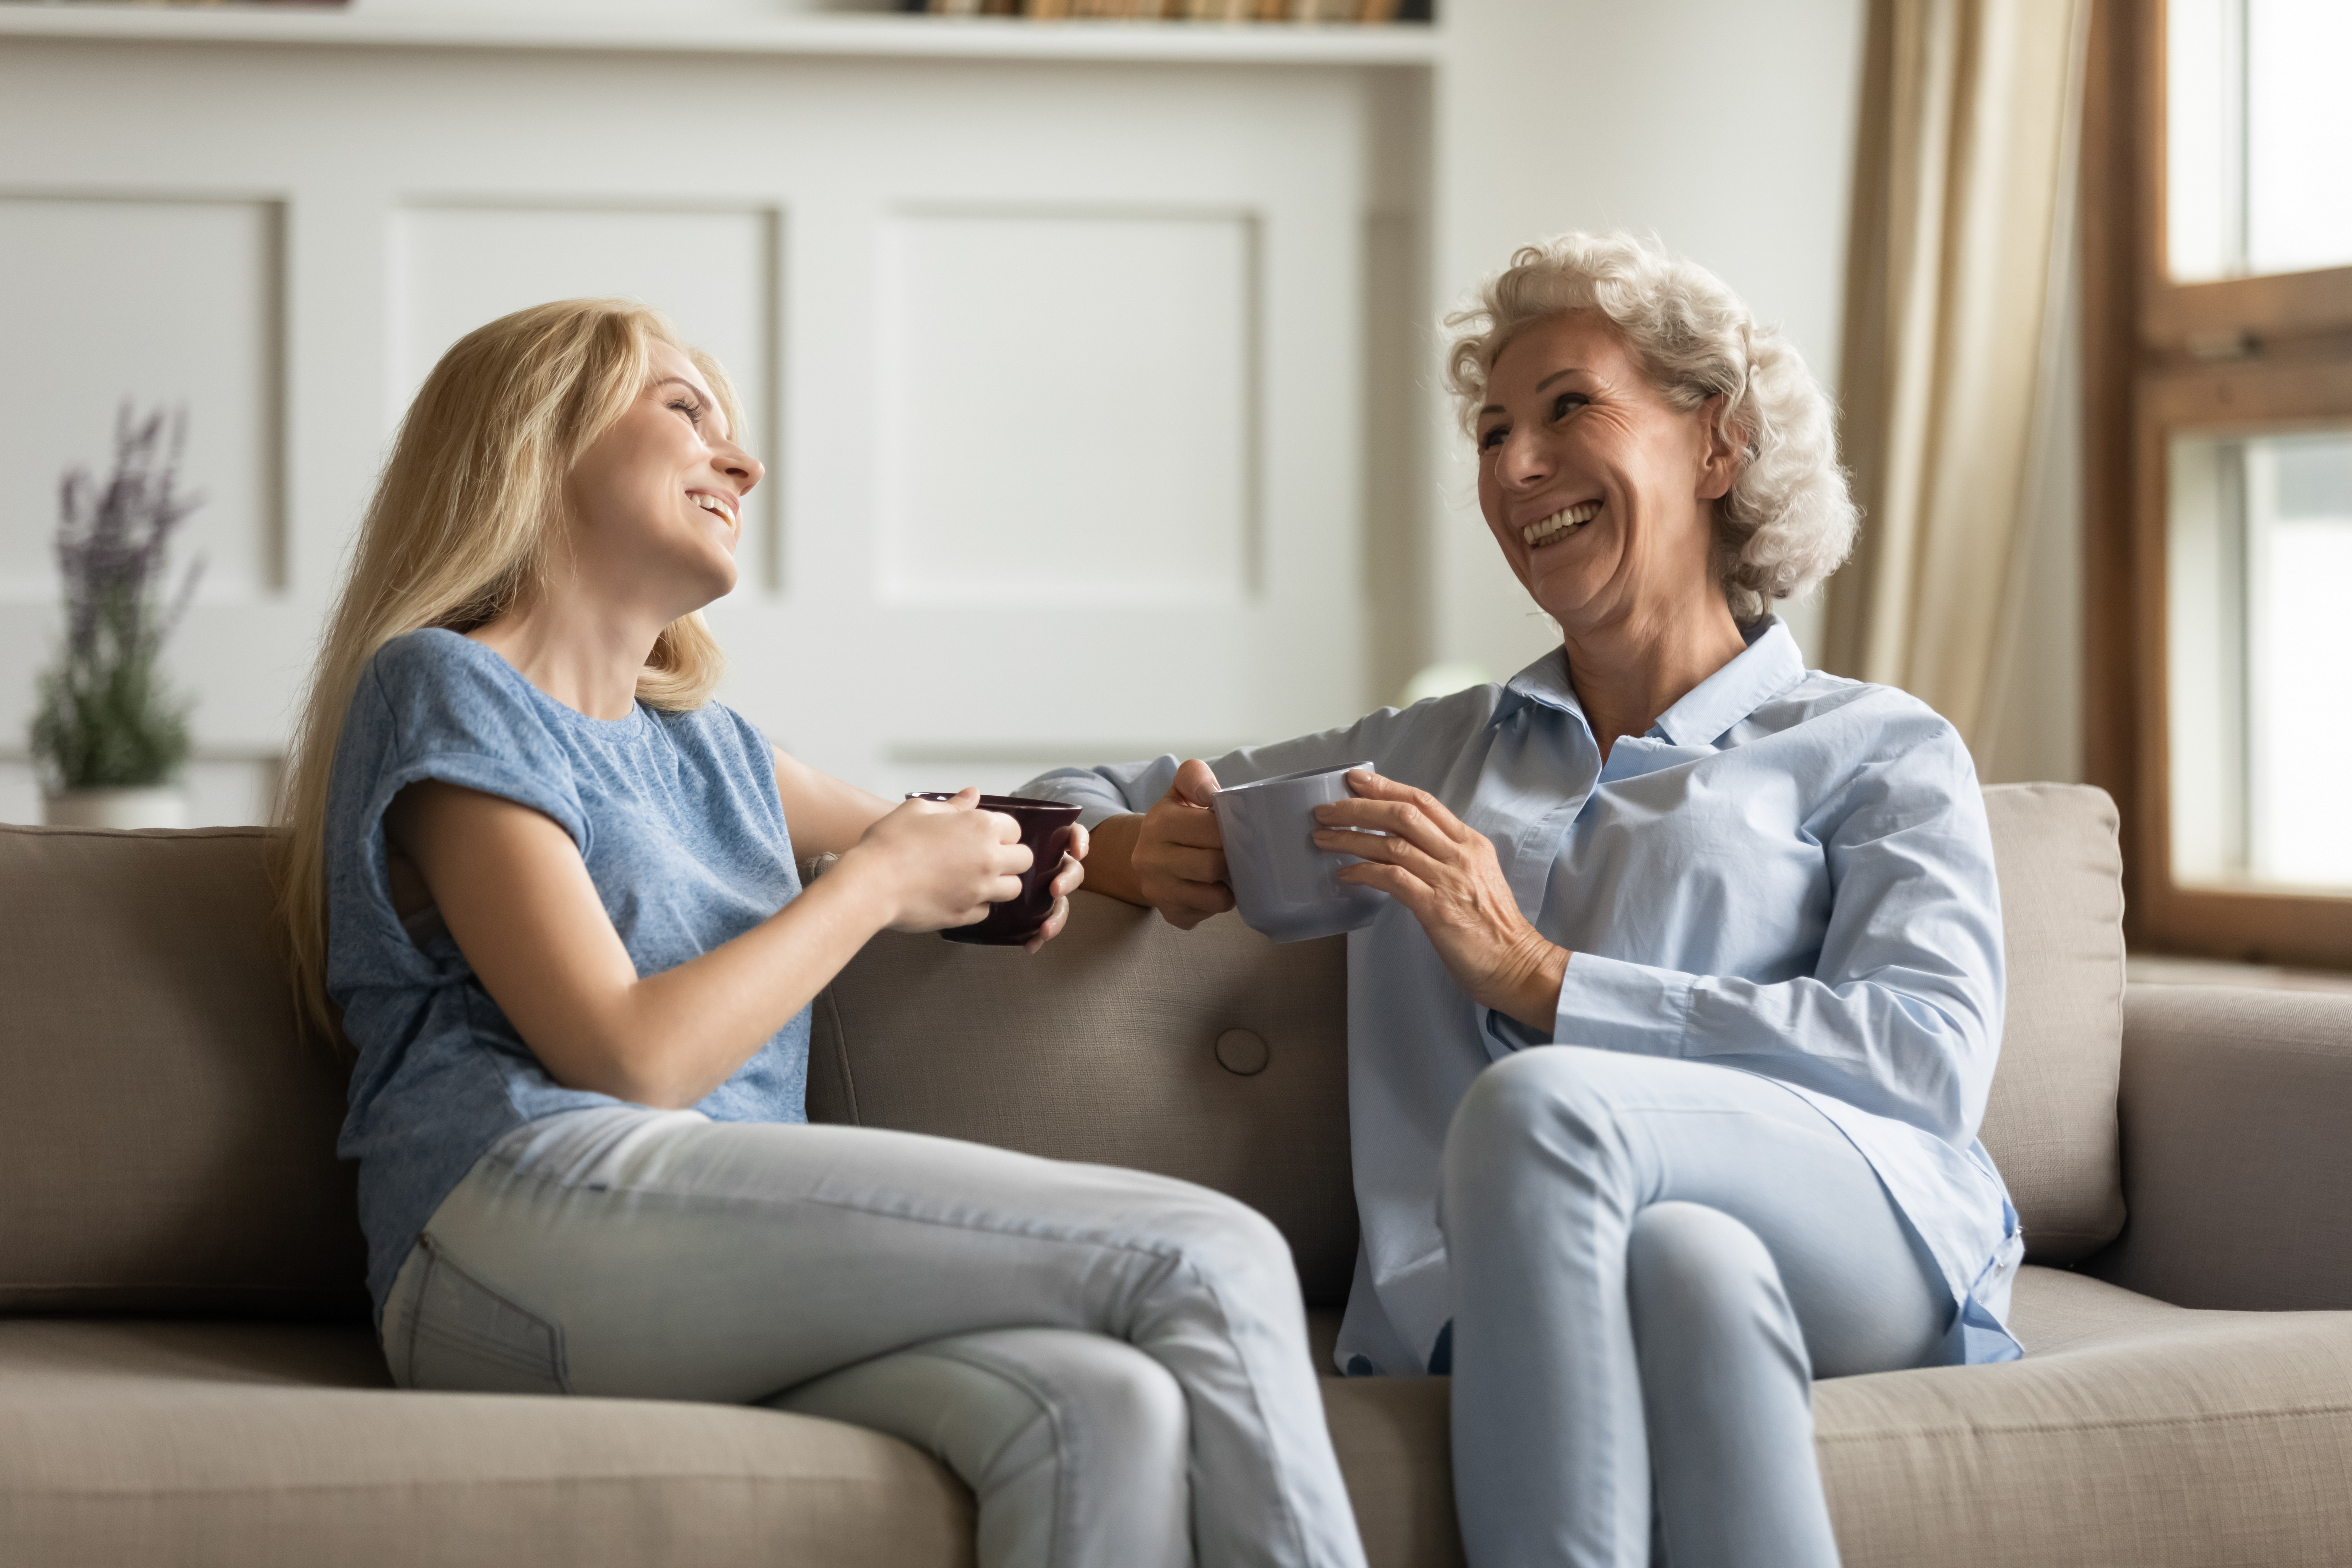 A younger and older woman bonding on a couch | Source: Shutterstock